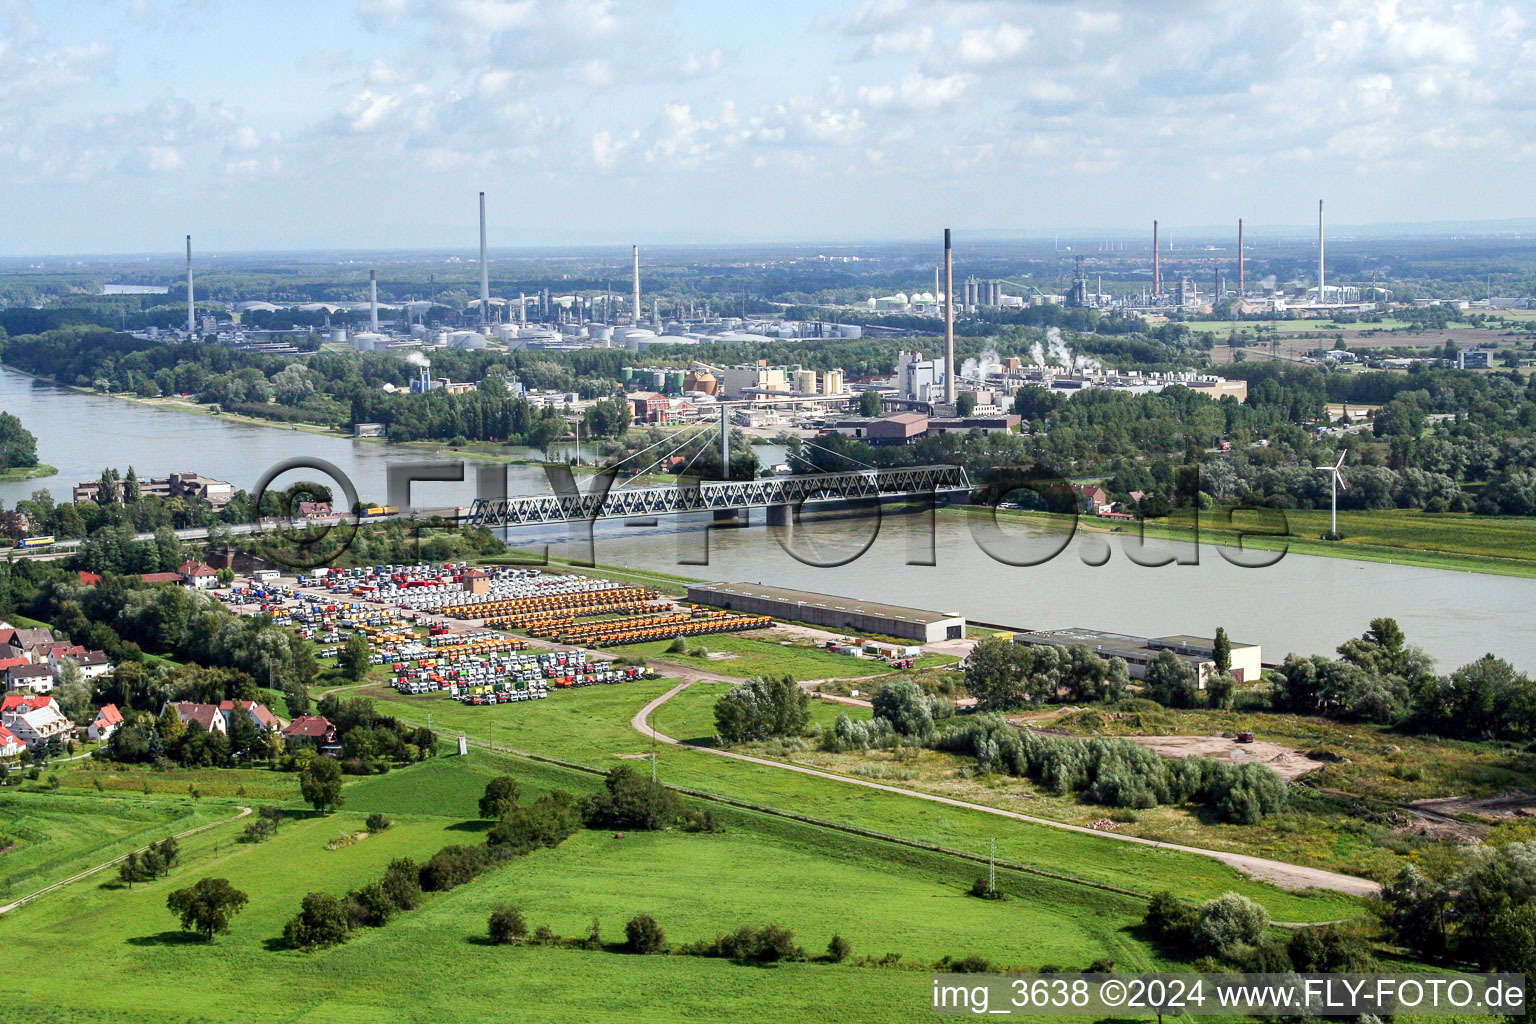 Aerial view of Rail and Street bridges construction across the Rhine river between Karlsruhe and Woerth am Rhein in the state Rhineland-Palatinate, Germany